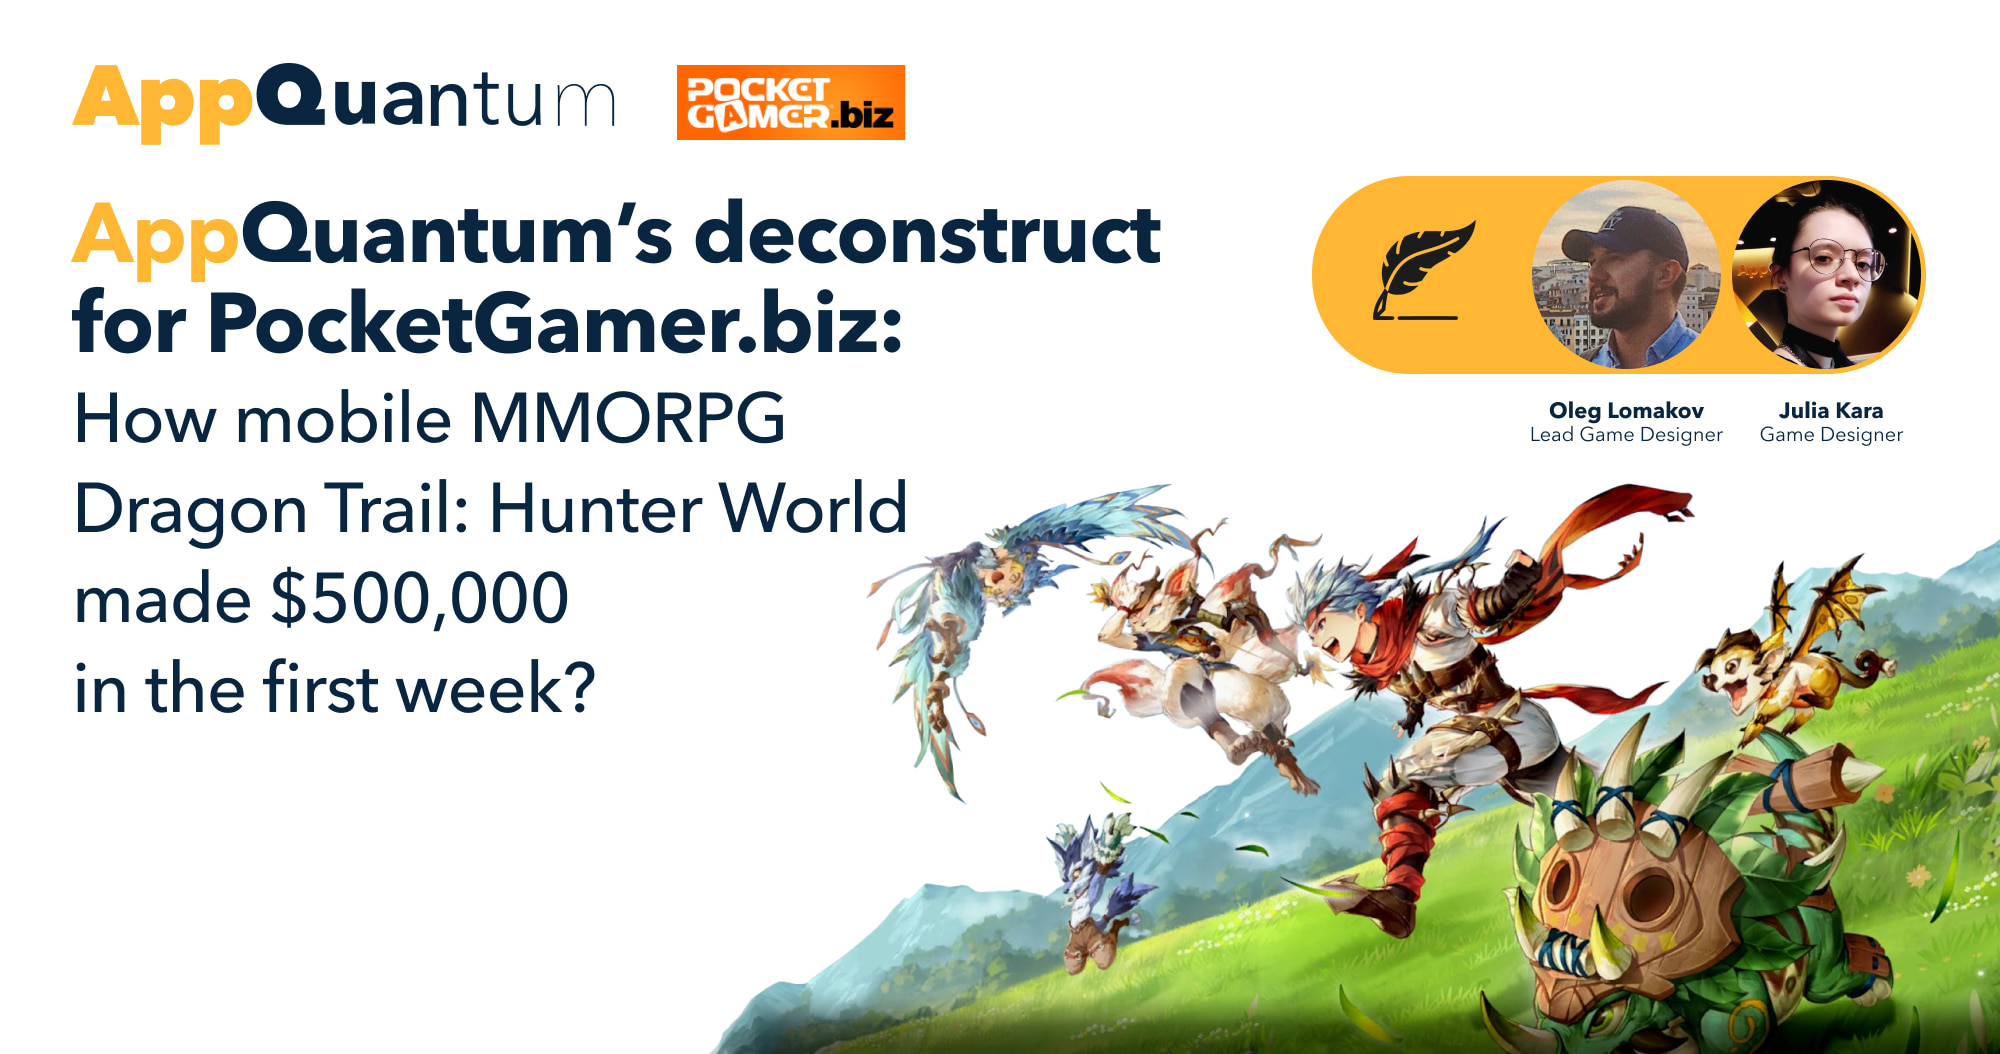 AppQuantum's Deconstruct for PocketGamer.biz: How Mobile MMORPG Dragon Trail: Hunter World Made $500,000 in The First Week? 